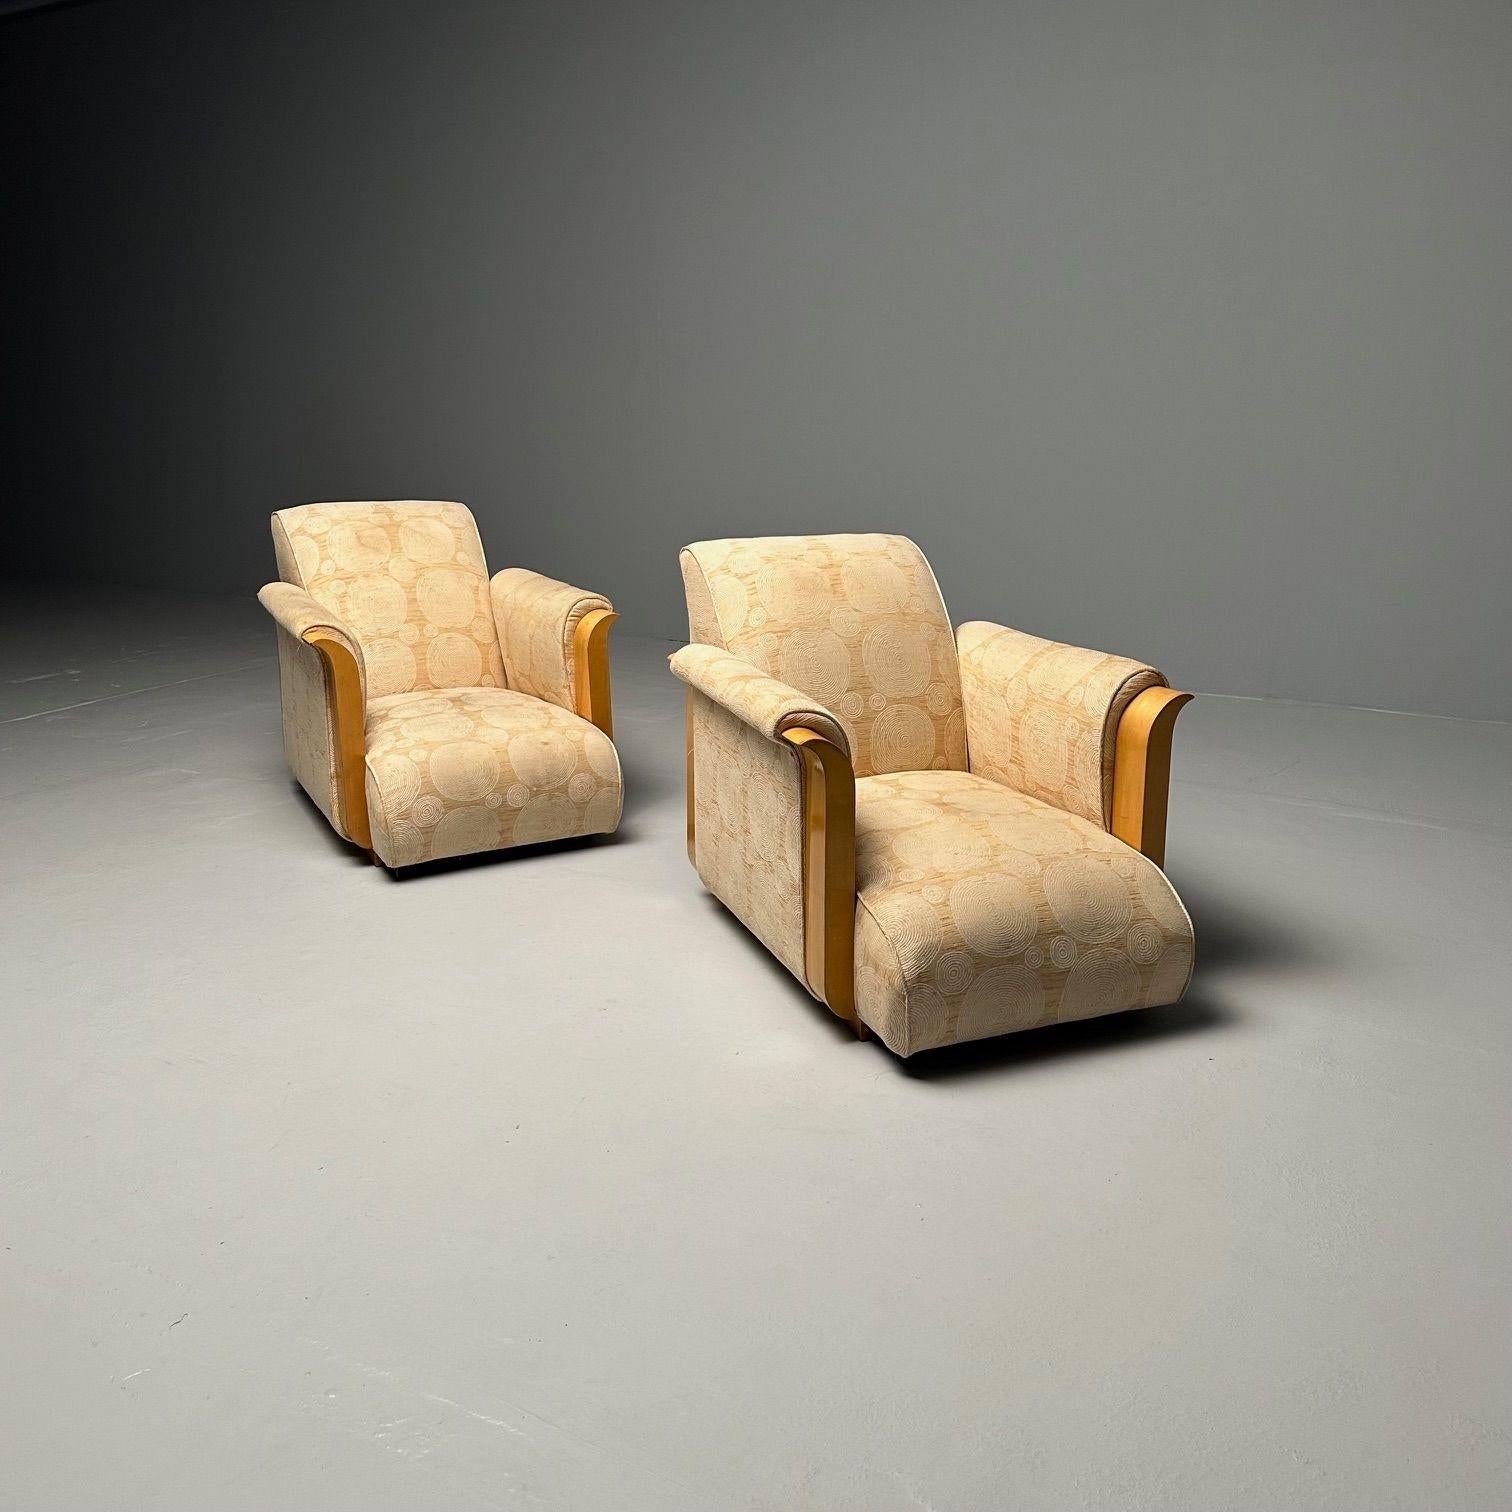 Rare Pair of French Art Deco Lounge Chairs by Michel Dufet, France, 1930s 5